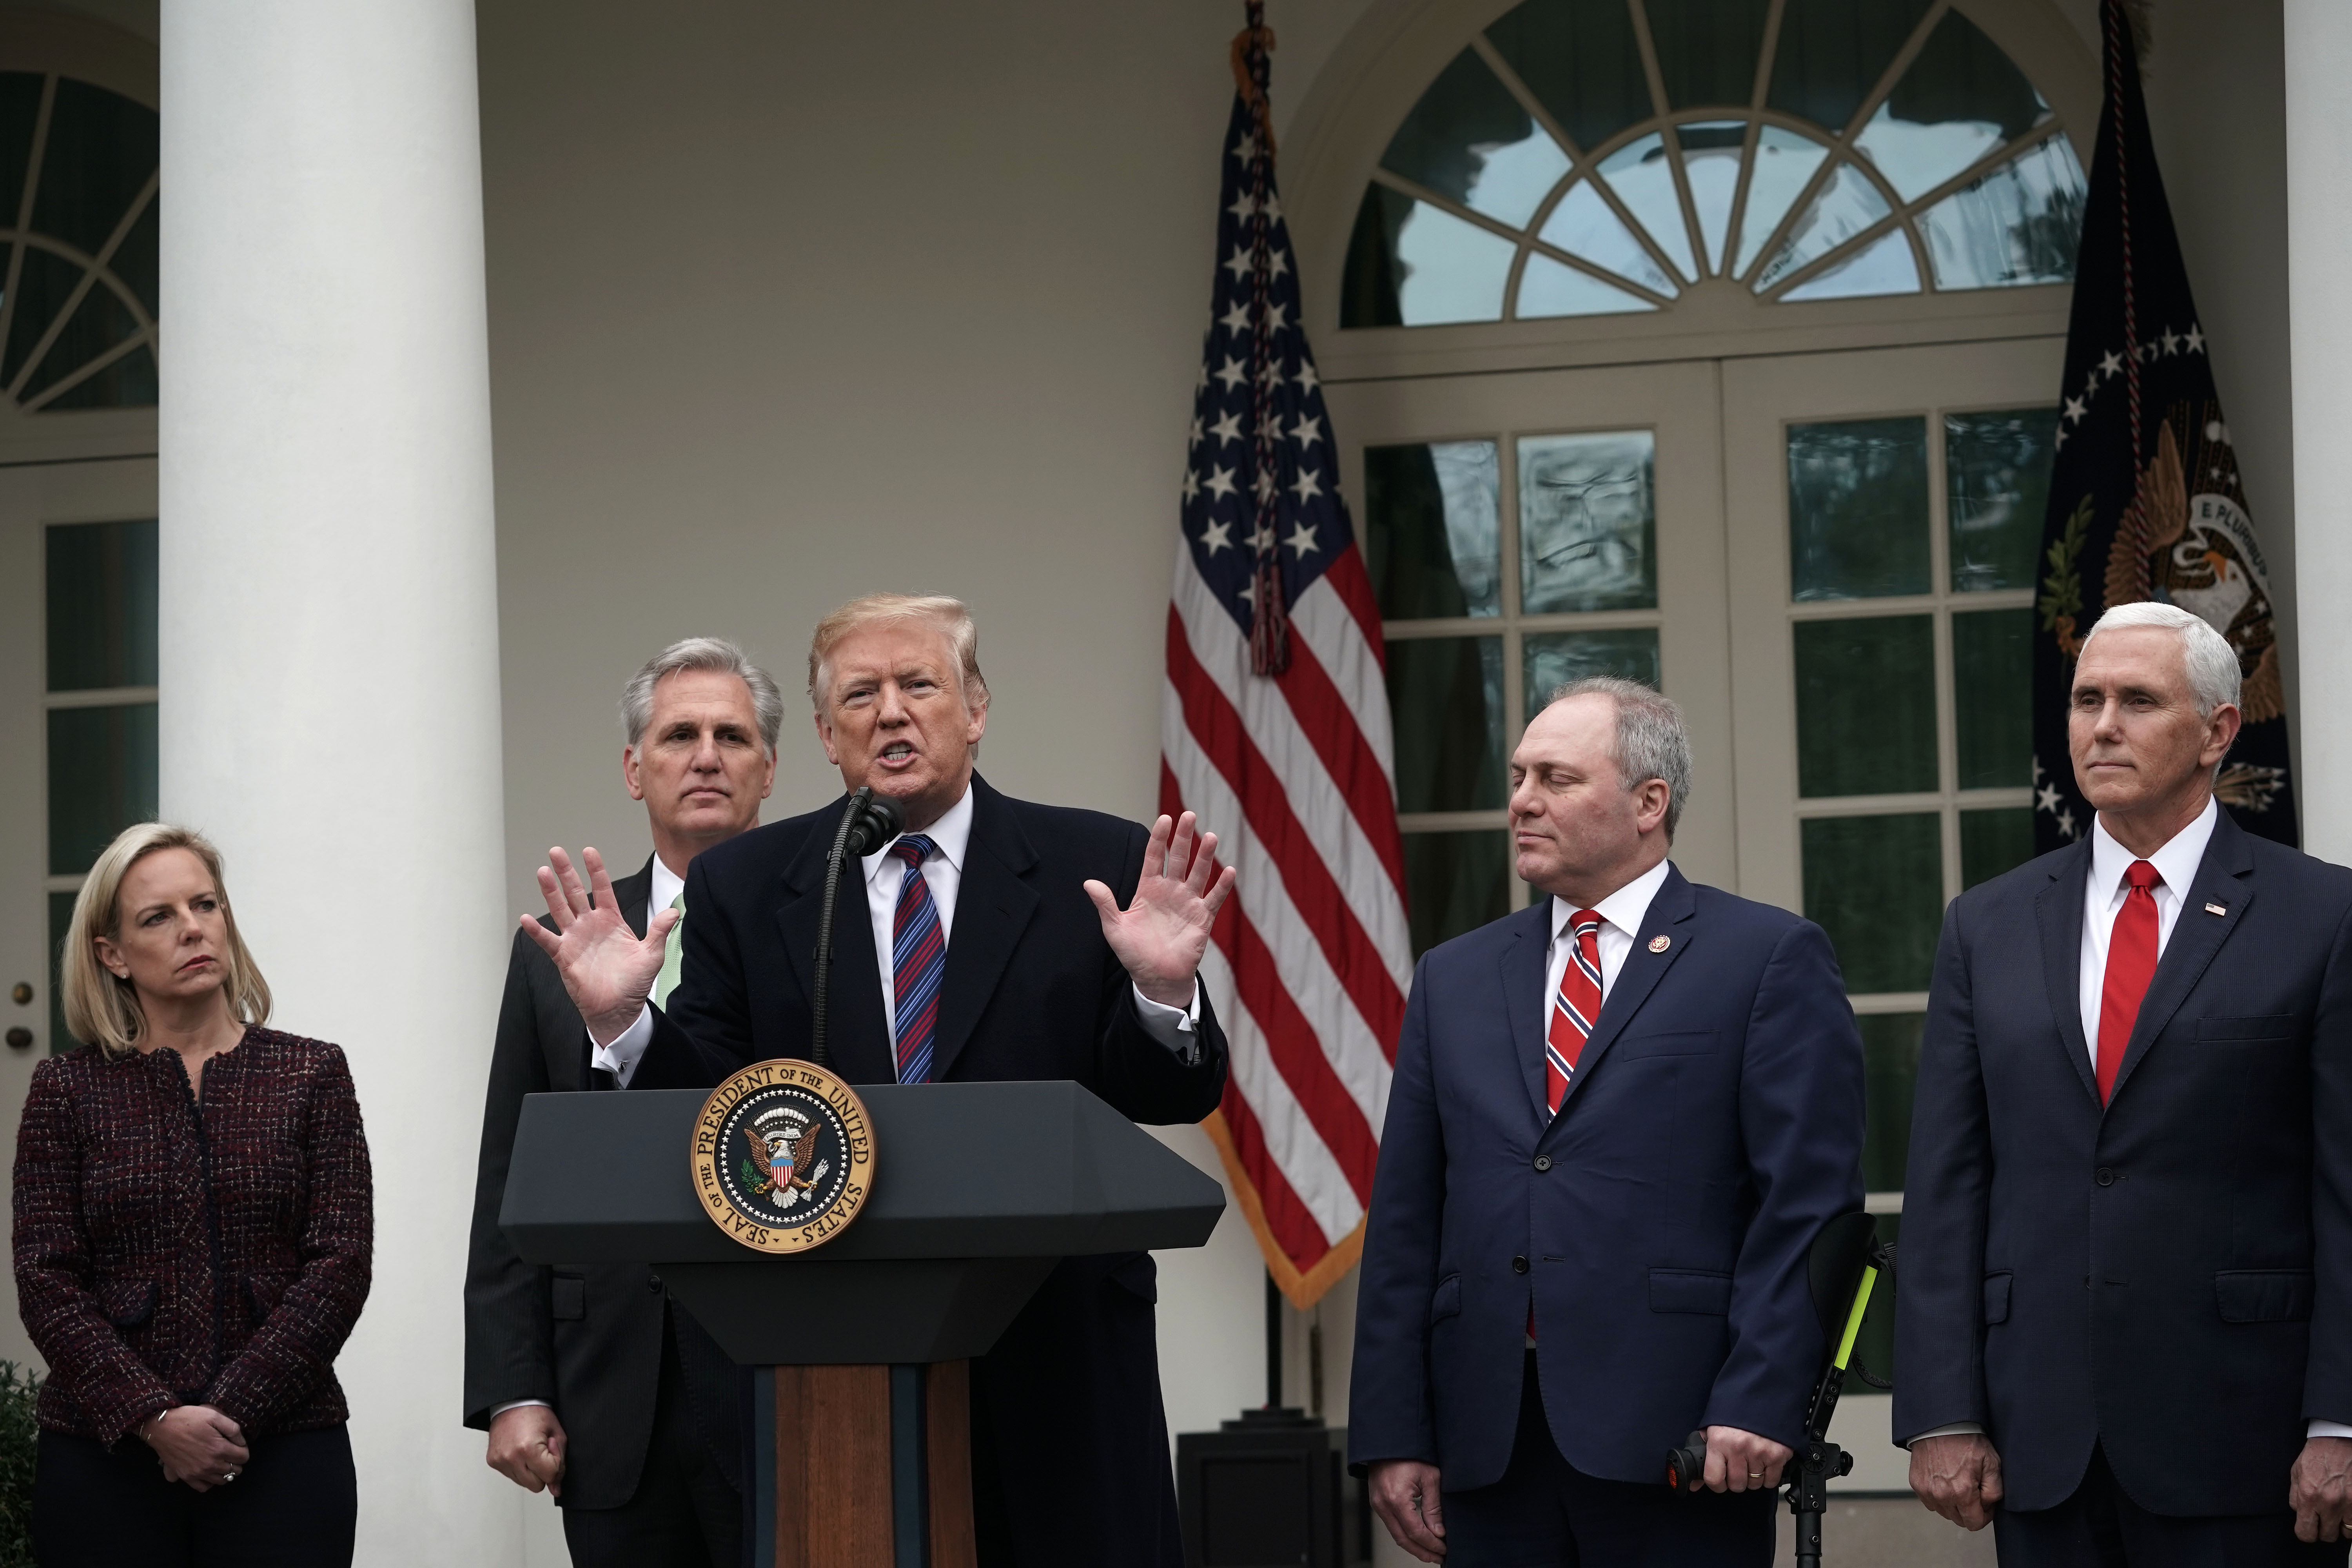 U.S. President Donald Trump (3rd L) speaks as Secretary of Homeland Security Kirstjen Nielsen (L), Vice President Mike Pence (R), House Minority Whip Rep. Steve Scalise (4th L) and House Minority Leader Rep. Kevin McCarthy (2nd L) listen in the Rose Garden of the White House on January 4, 2019 in Washington, DC. (Photo by Alex Wong/Getty Images)